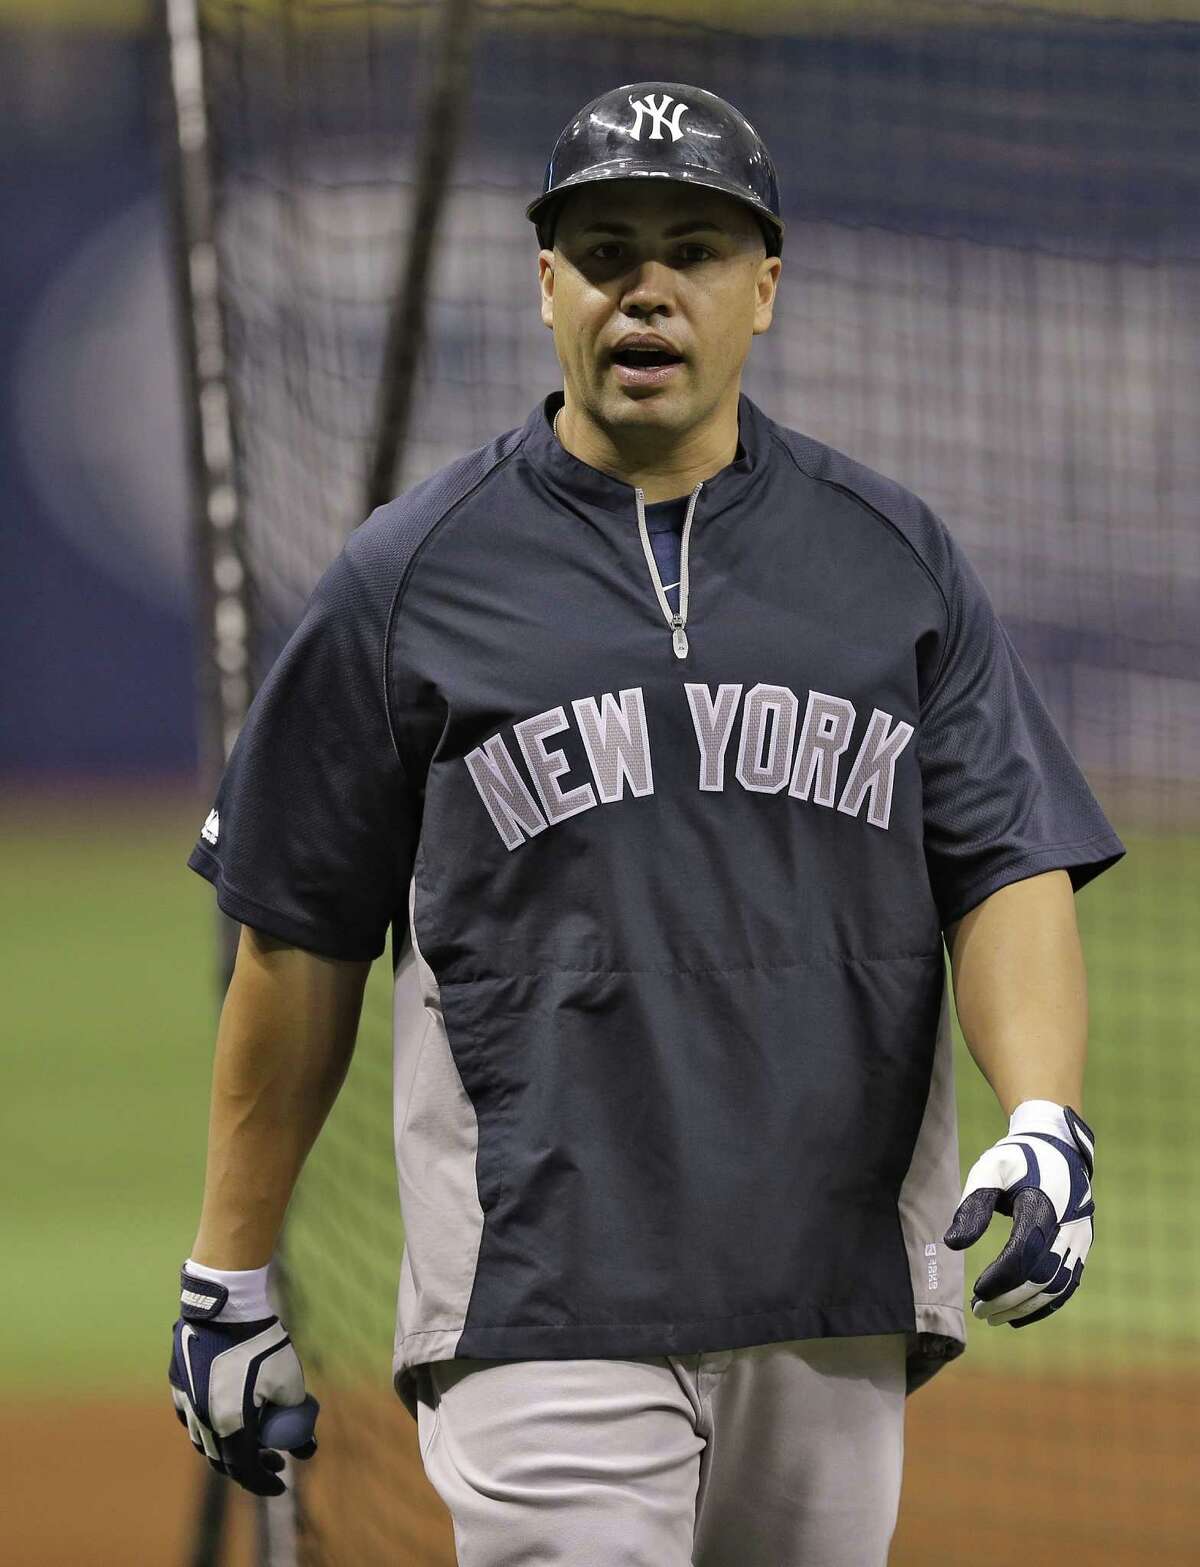 New York Yankees right fielder Carlos Beltran (36) before a baseball game against the Tampa Bay Rays Thursday, April 17, 2014, in St. Petersburg, Fla. (AP Photo/Chris O'Meara)